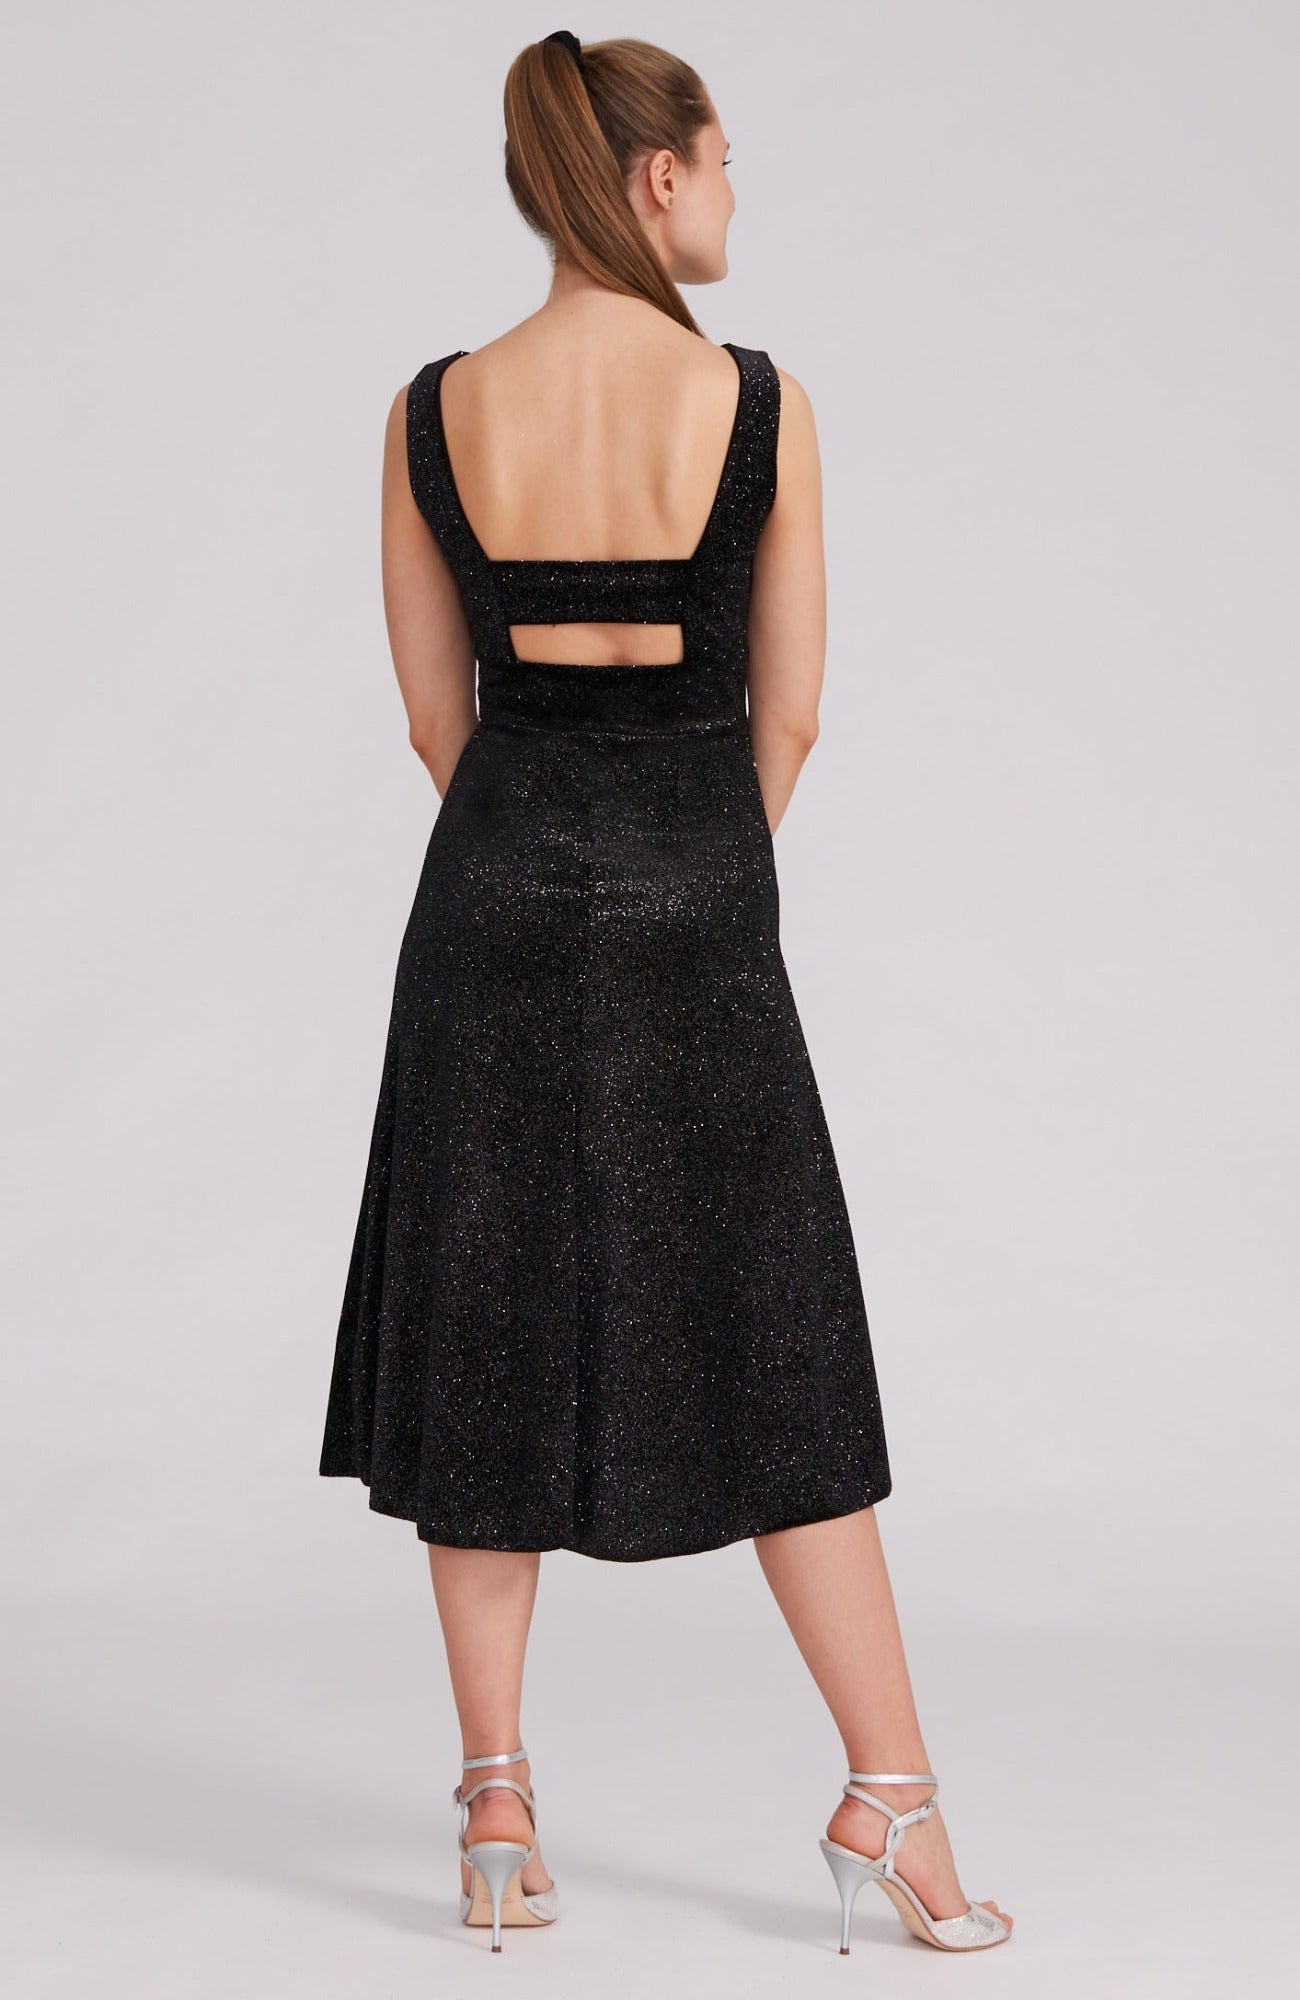 shining tango dress in black with low back